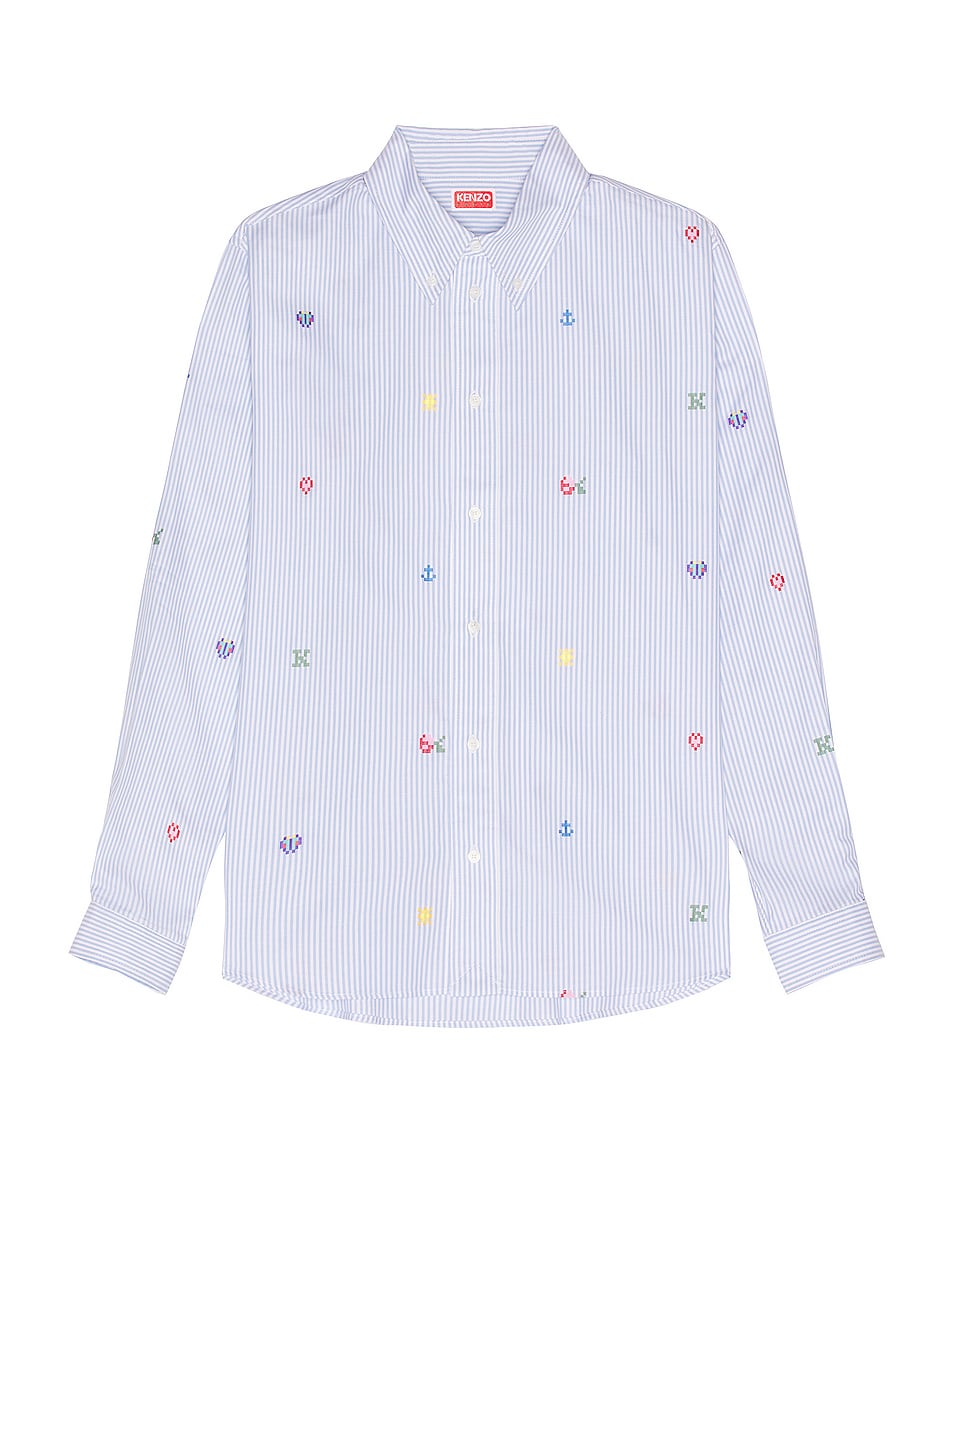 Image 1 of Kenzo Pixel Striped Casual Shirt in Light Blue